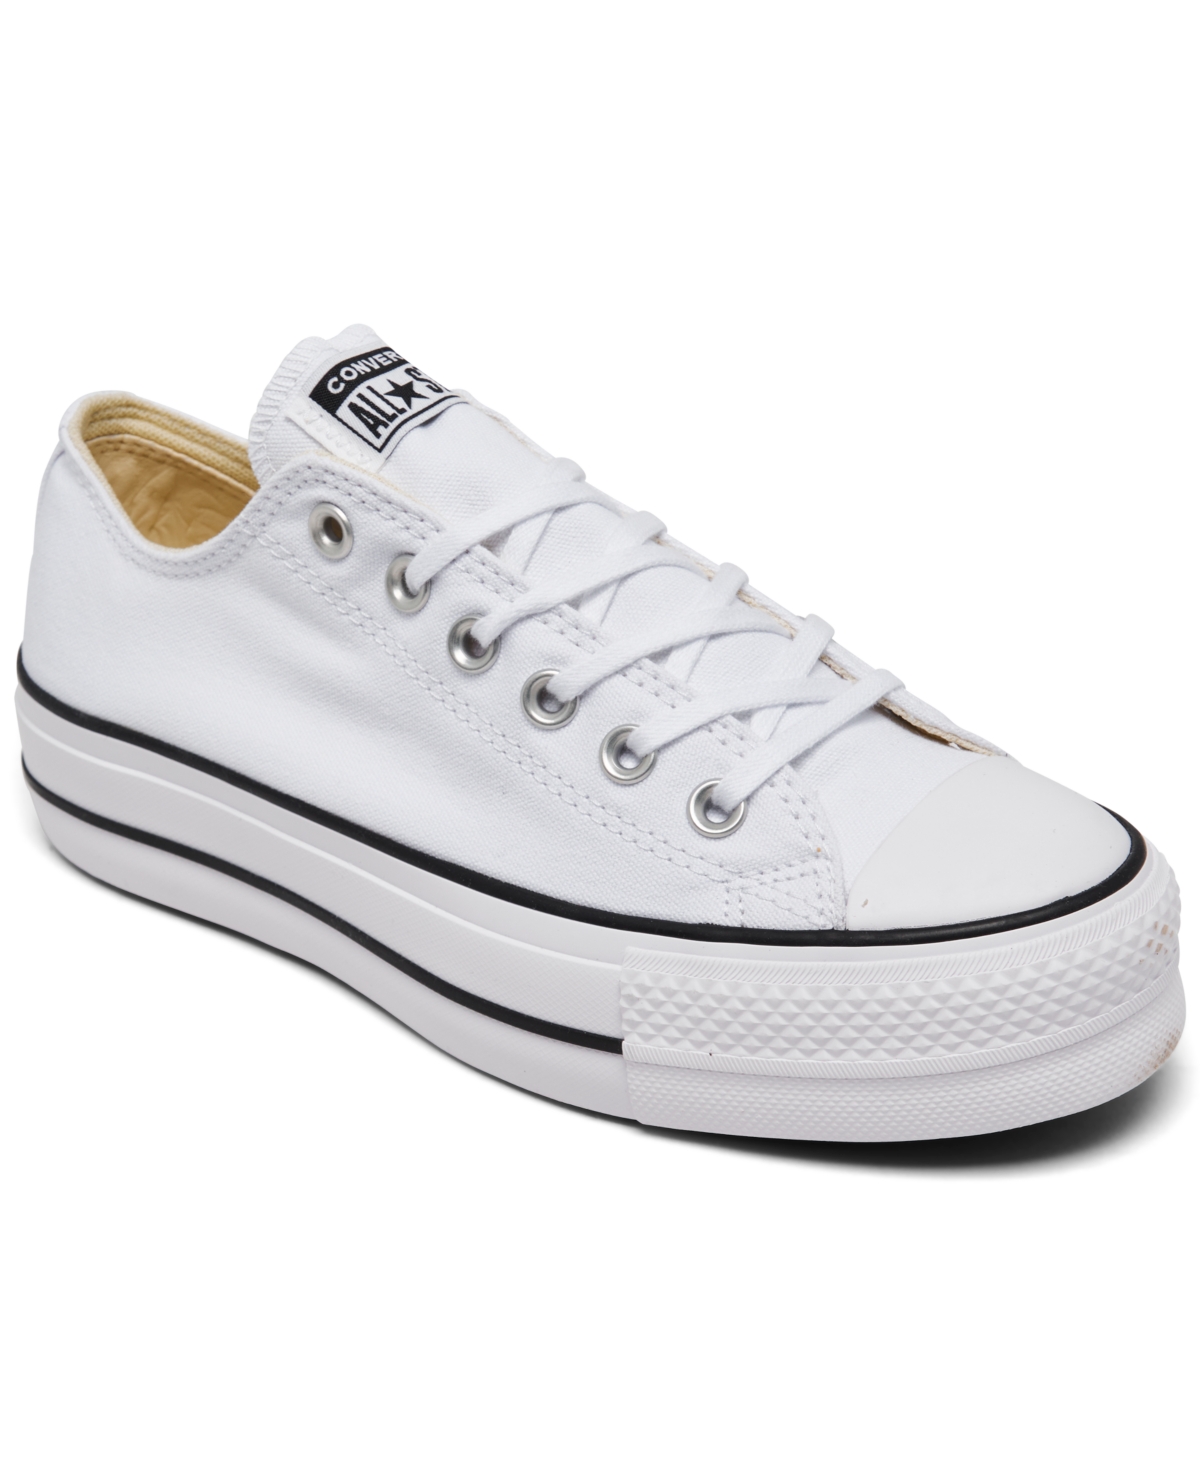 Women's Chuck Taylor All Star Lift Low Top Casual Sneakers from Finish Line - White, Black